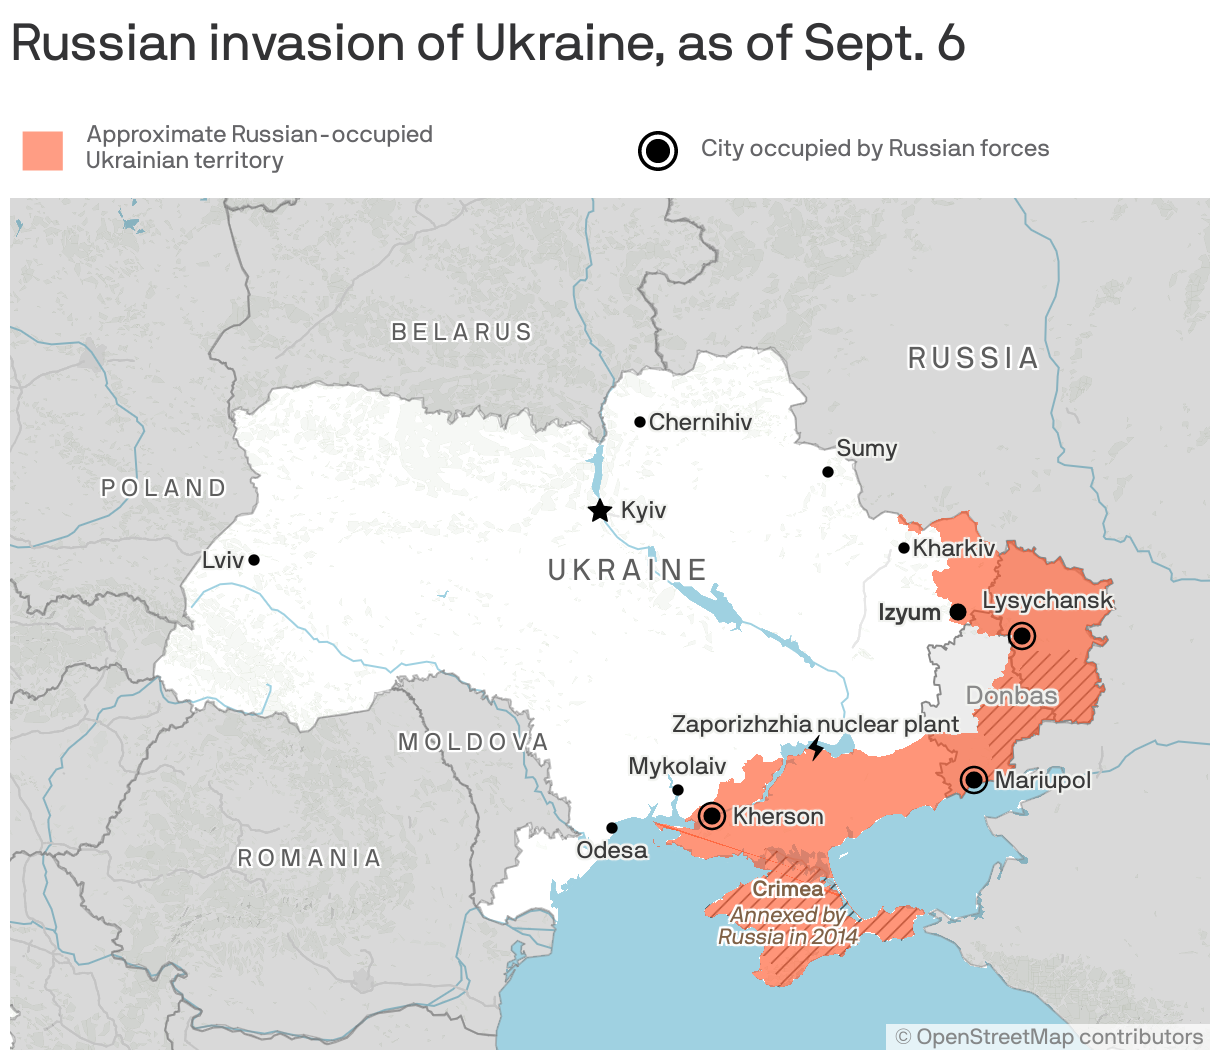 Russian invasion of Ukraine, as of Sept. 6